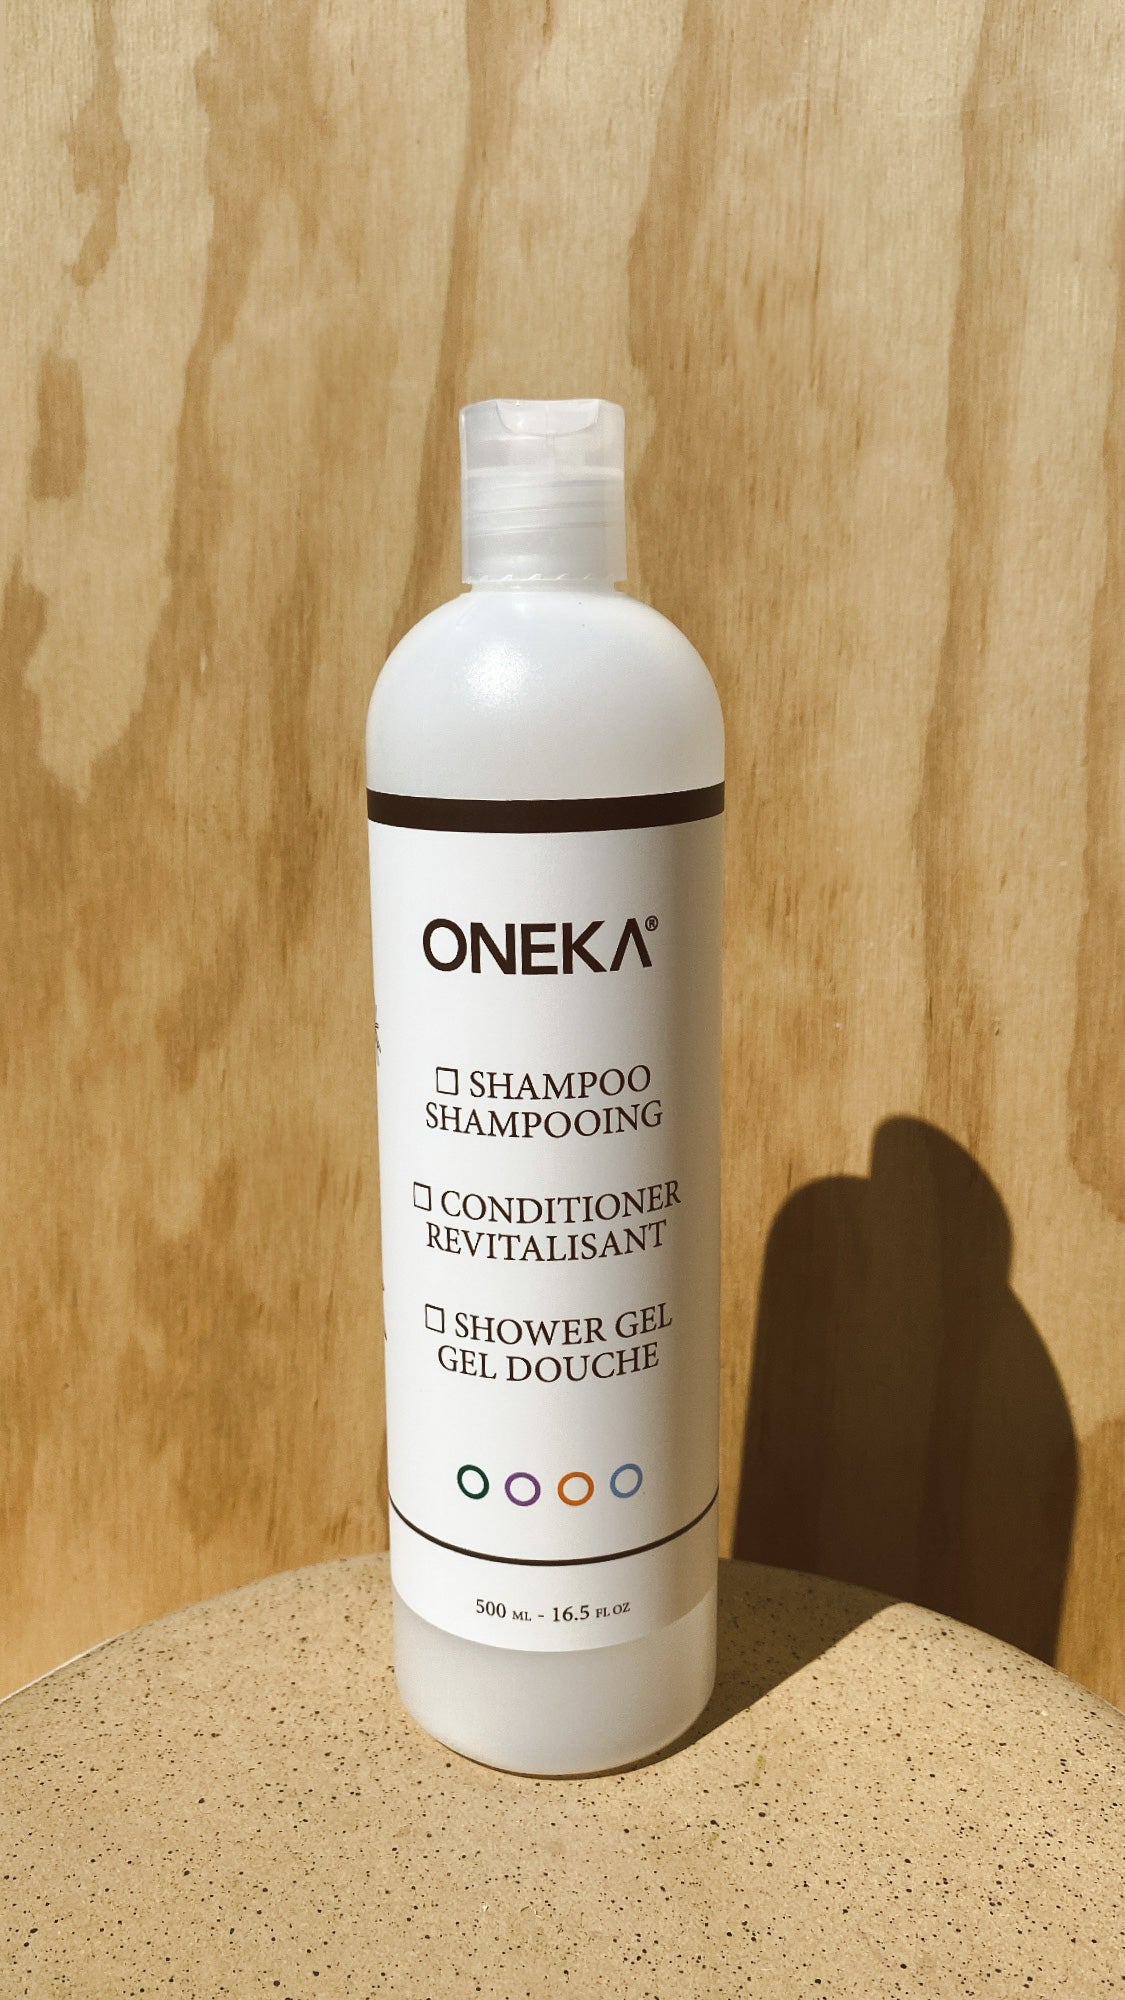 Shampoo | Goldenseal + Citrus by Oneka